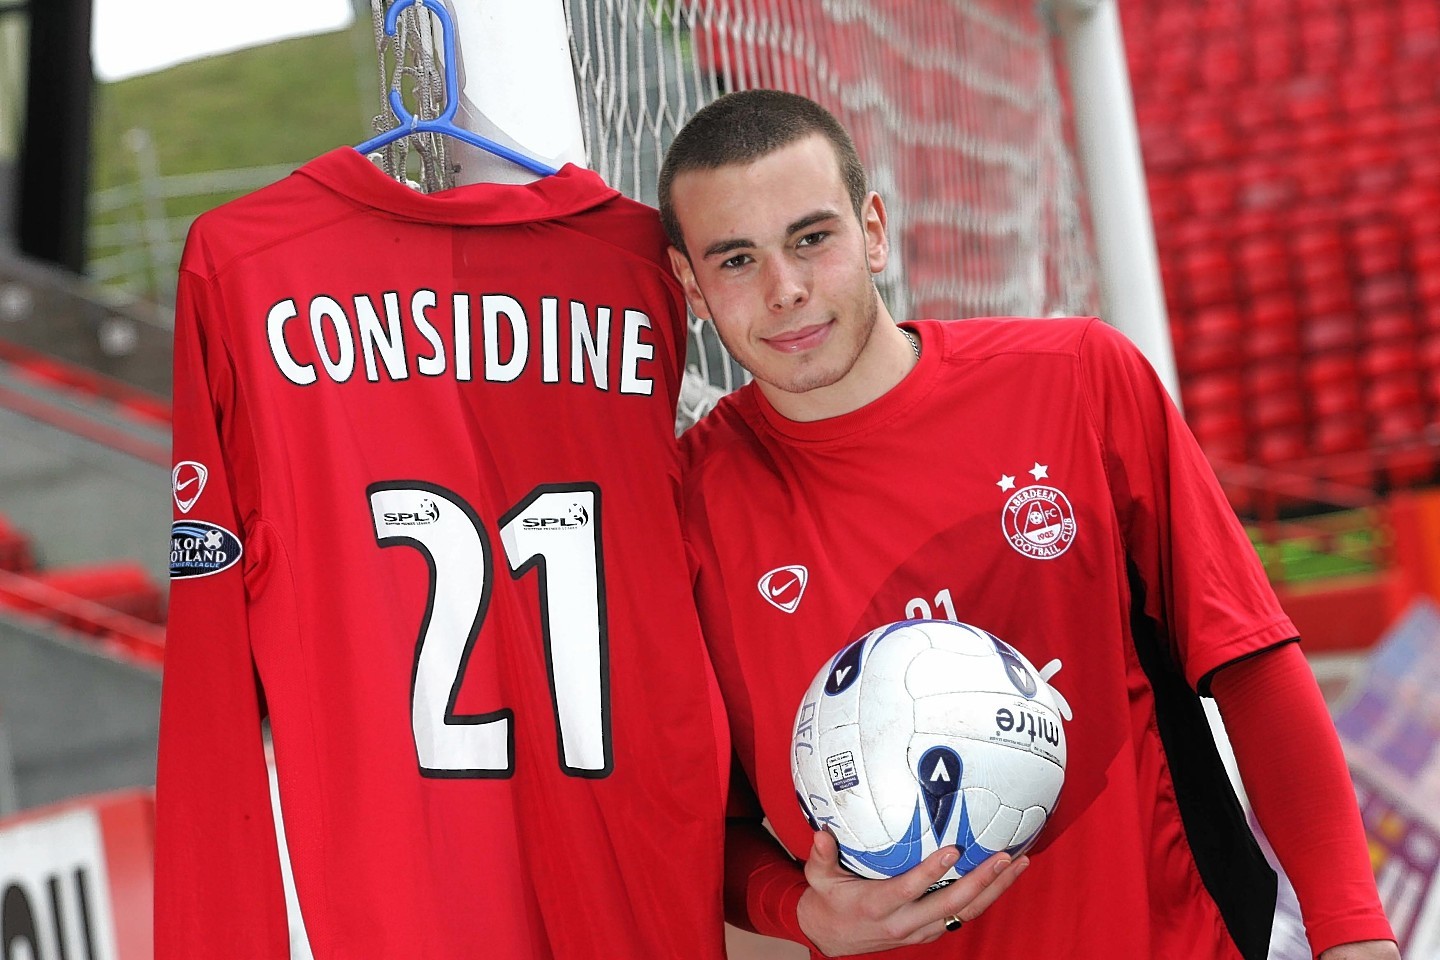 Considine has spent 11 seasons in the Dons first team